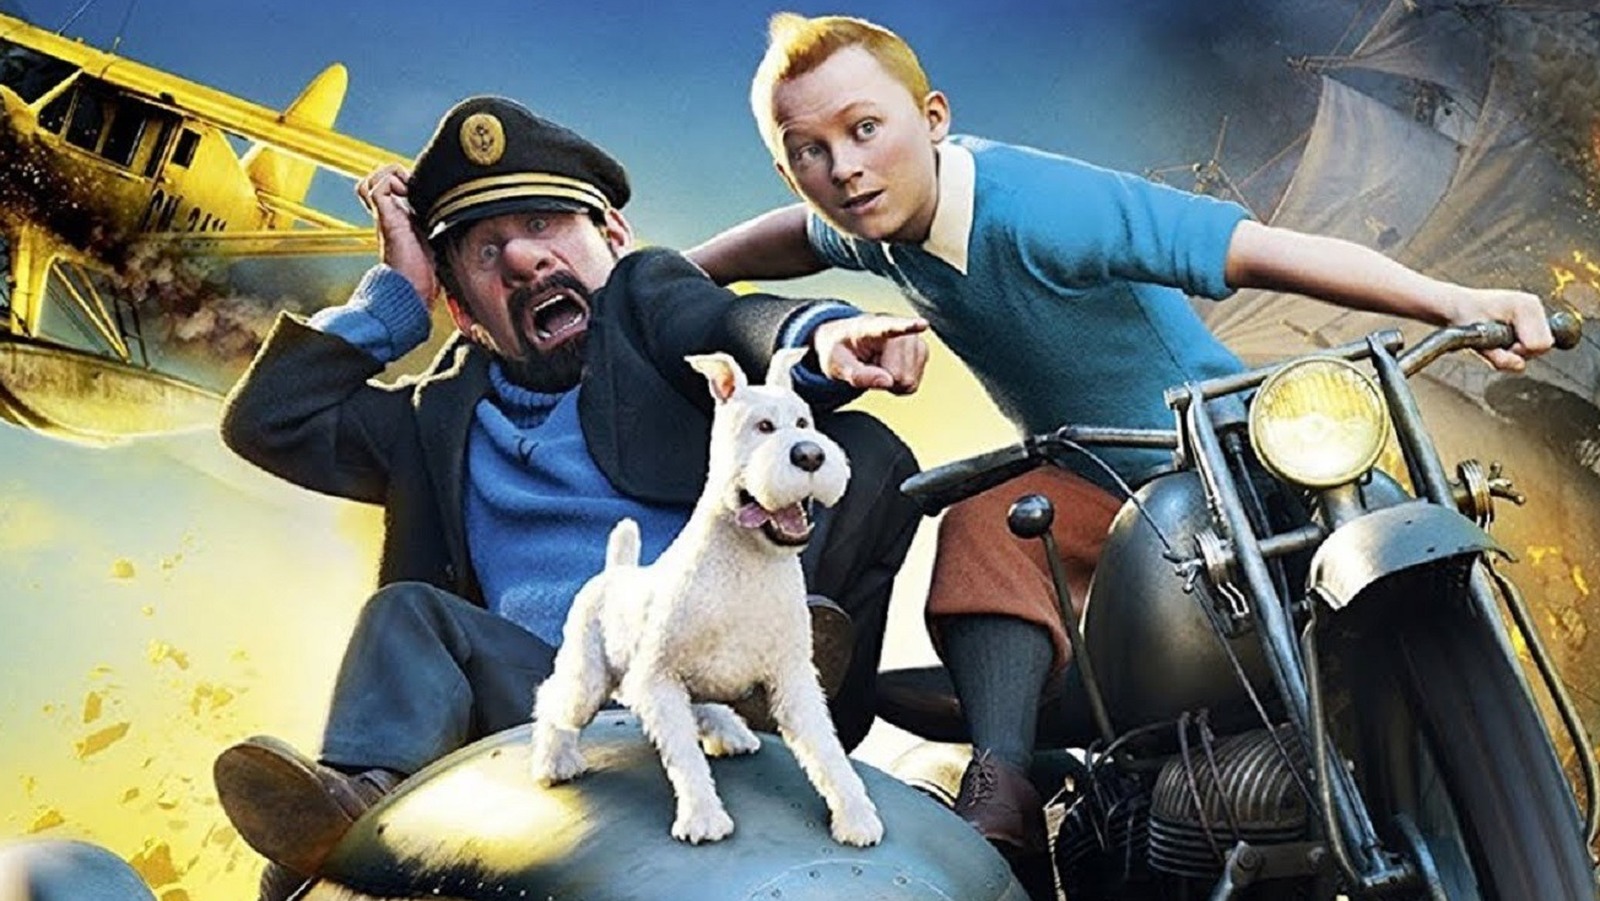 Things Only Adults Notice In The Adventures Of Tintin